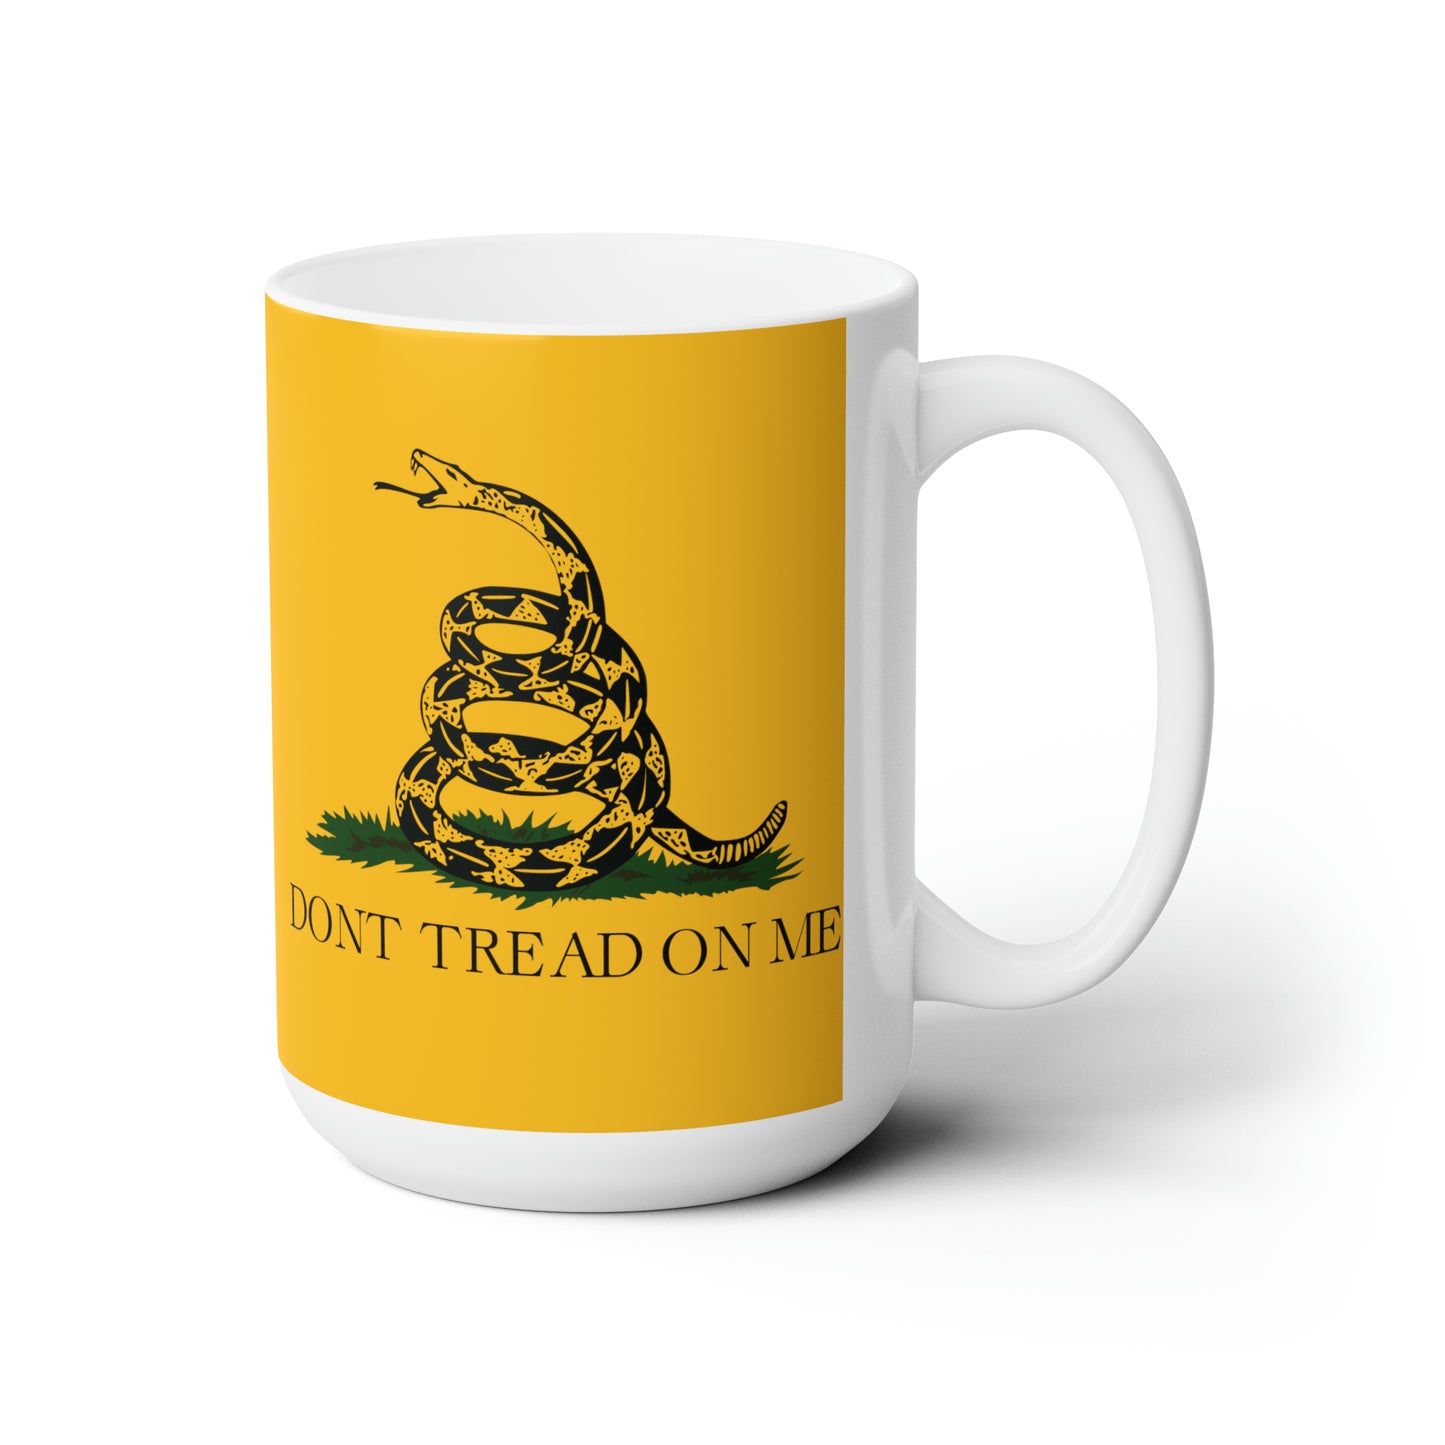 Gadsden Flag Coffee Mug For Don't Tread On Me Hot Tea Cup For Conservative Gift